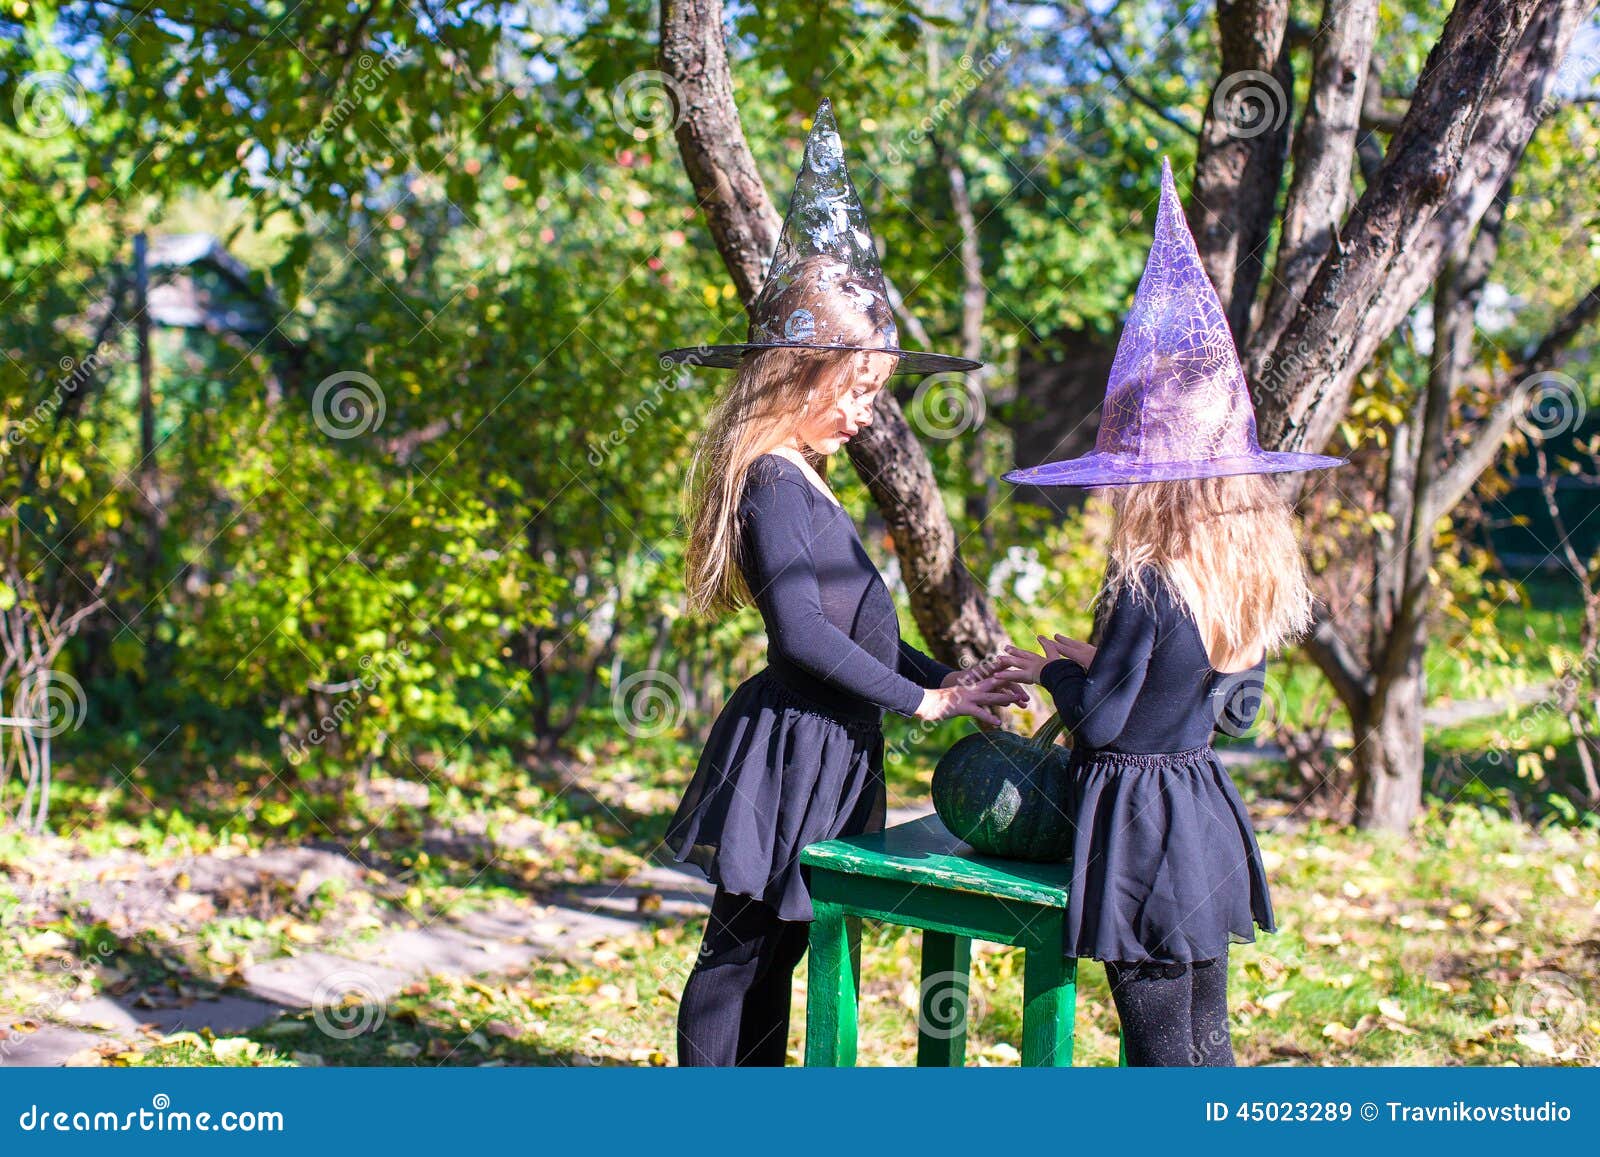 Little Girls Casting a Spell on Halloween in Witch Stock Image - Image ...